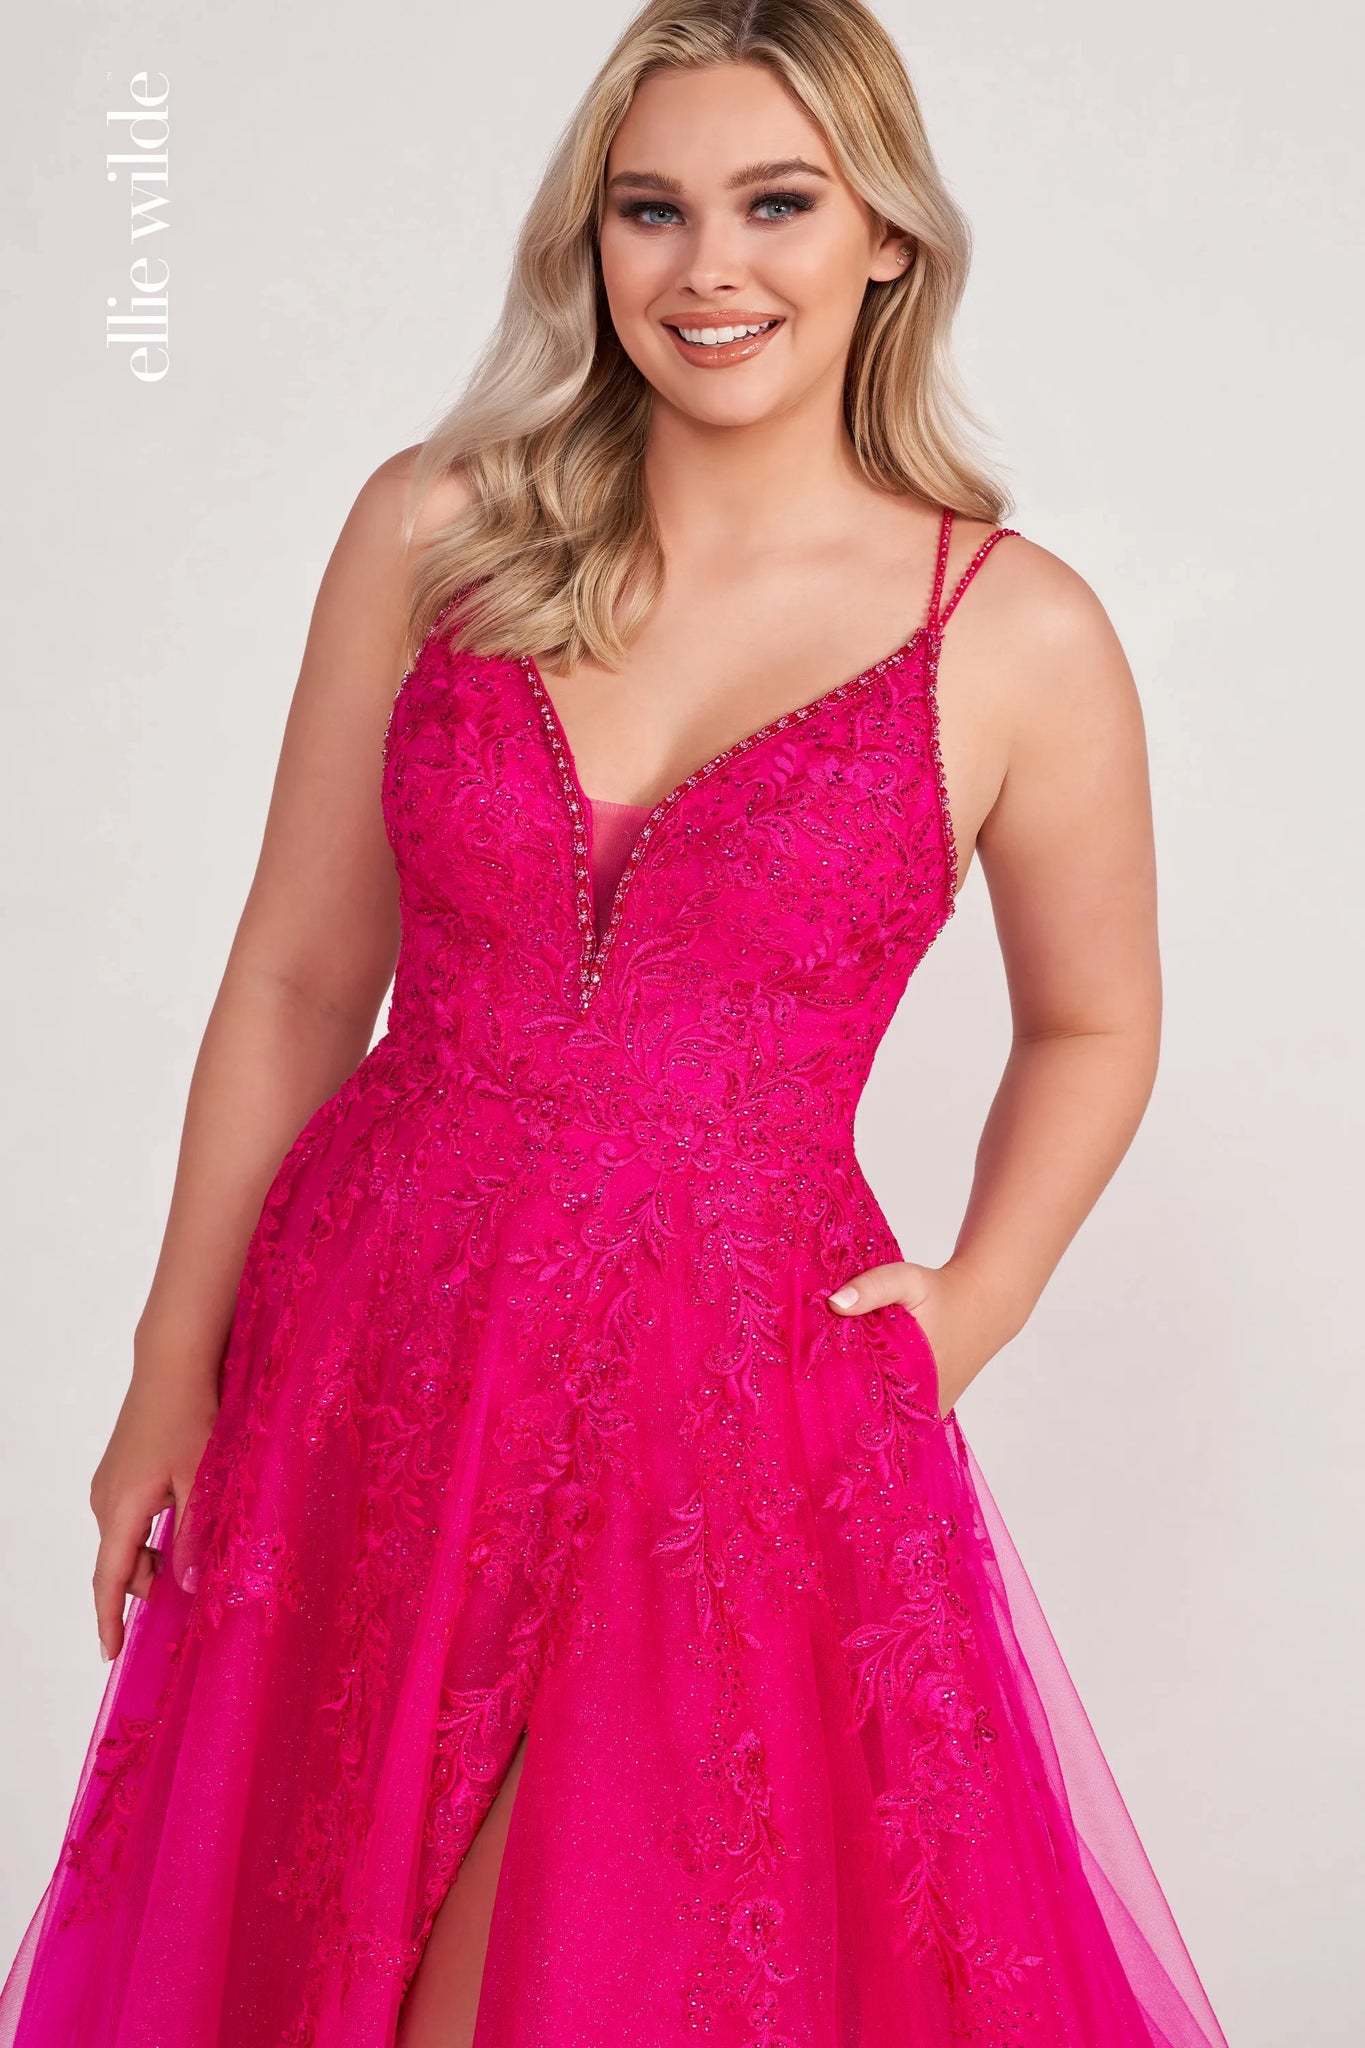 This Ellie Wilde EW34095 petal prom dress is crafted in glitter tulle, with beaded trims on the plunging neckline, double straps, and the strappy open back. Beaded floral embroidery richly embellished this pretty ballgown, finished with in-seam pockets, high slit, horsehair hem, and court train.